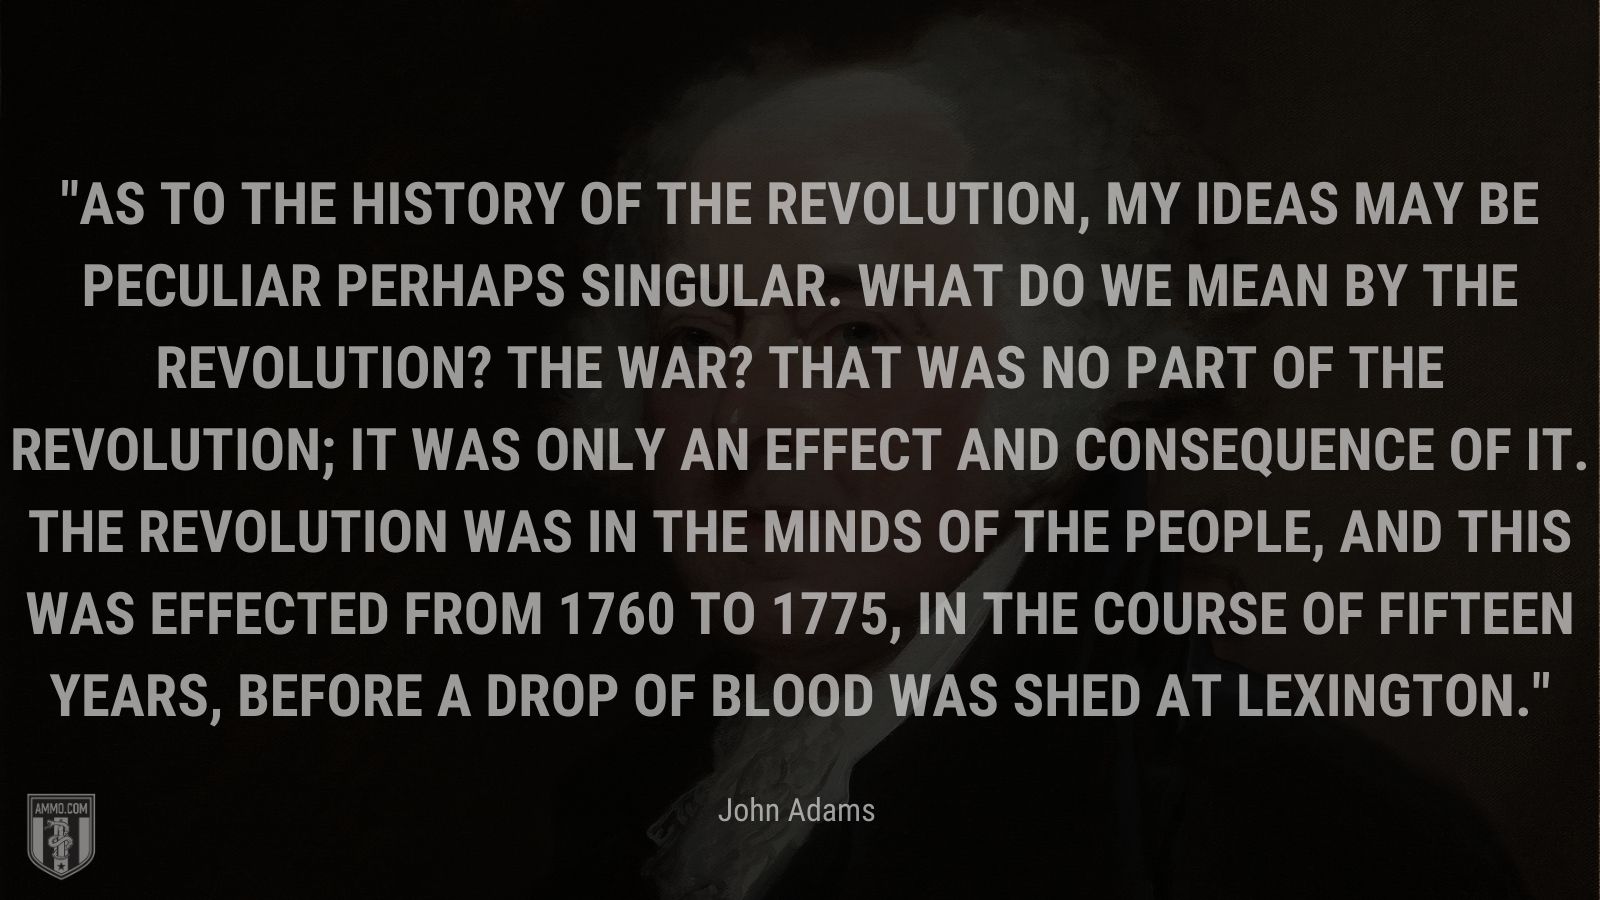 “As to the history of the revolution, my ideas may be peculiar perhaps singular. What do we mean by the revolution? The war? That was no part of the revolution; it was only an effect and consequence of it. The revolution was in the minds of the people, and this was effected from 1760 to 1775, in the course of fifteen years, before a drop of blood was shed at Lexington.” - John Adams